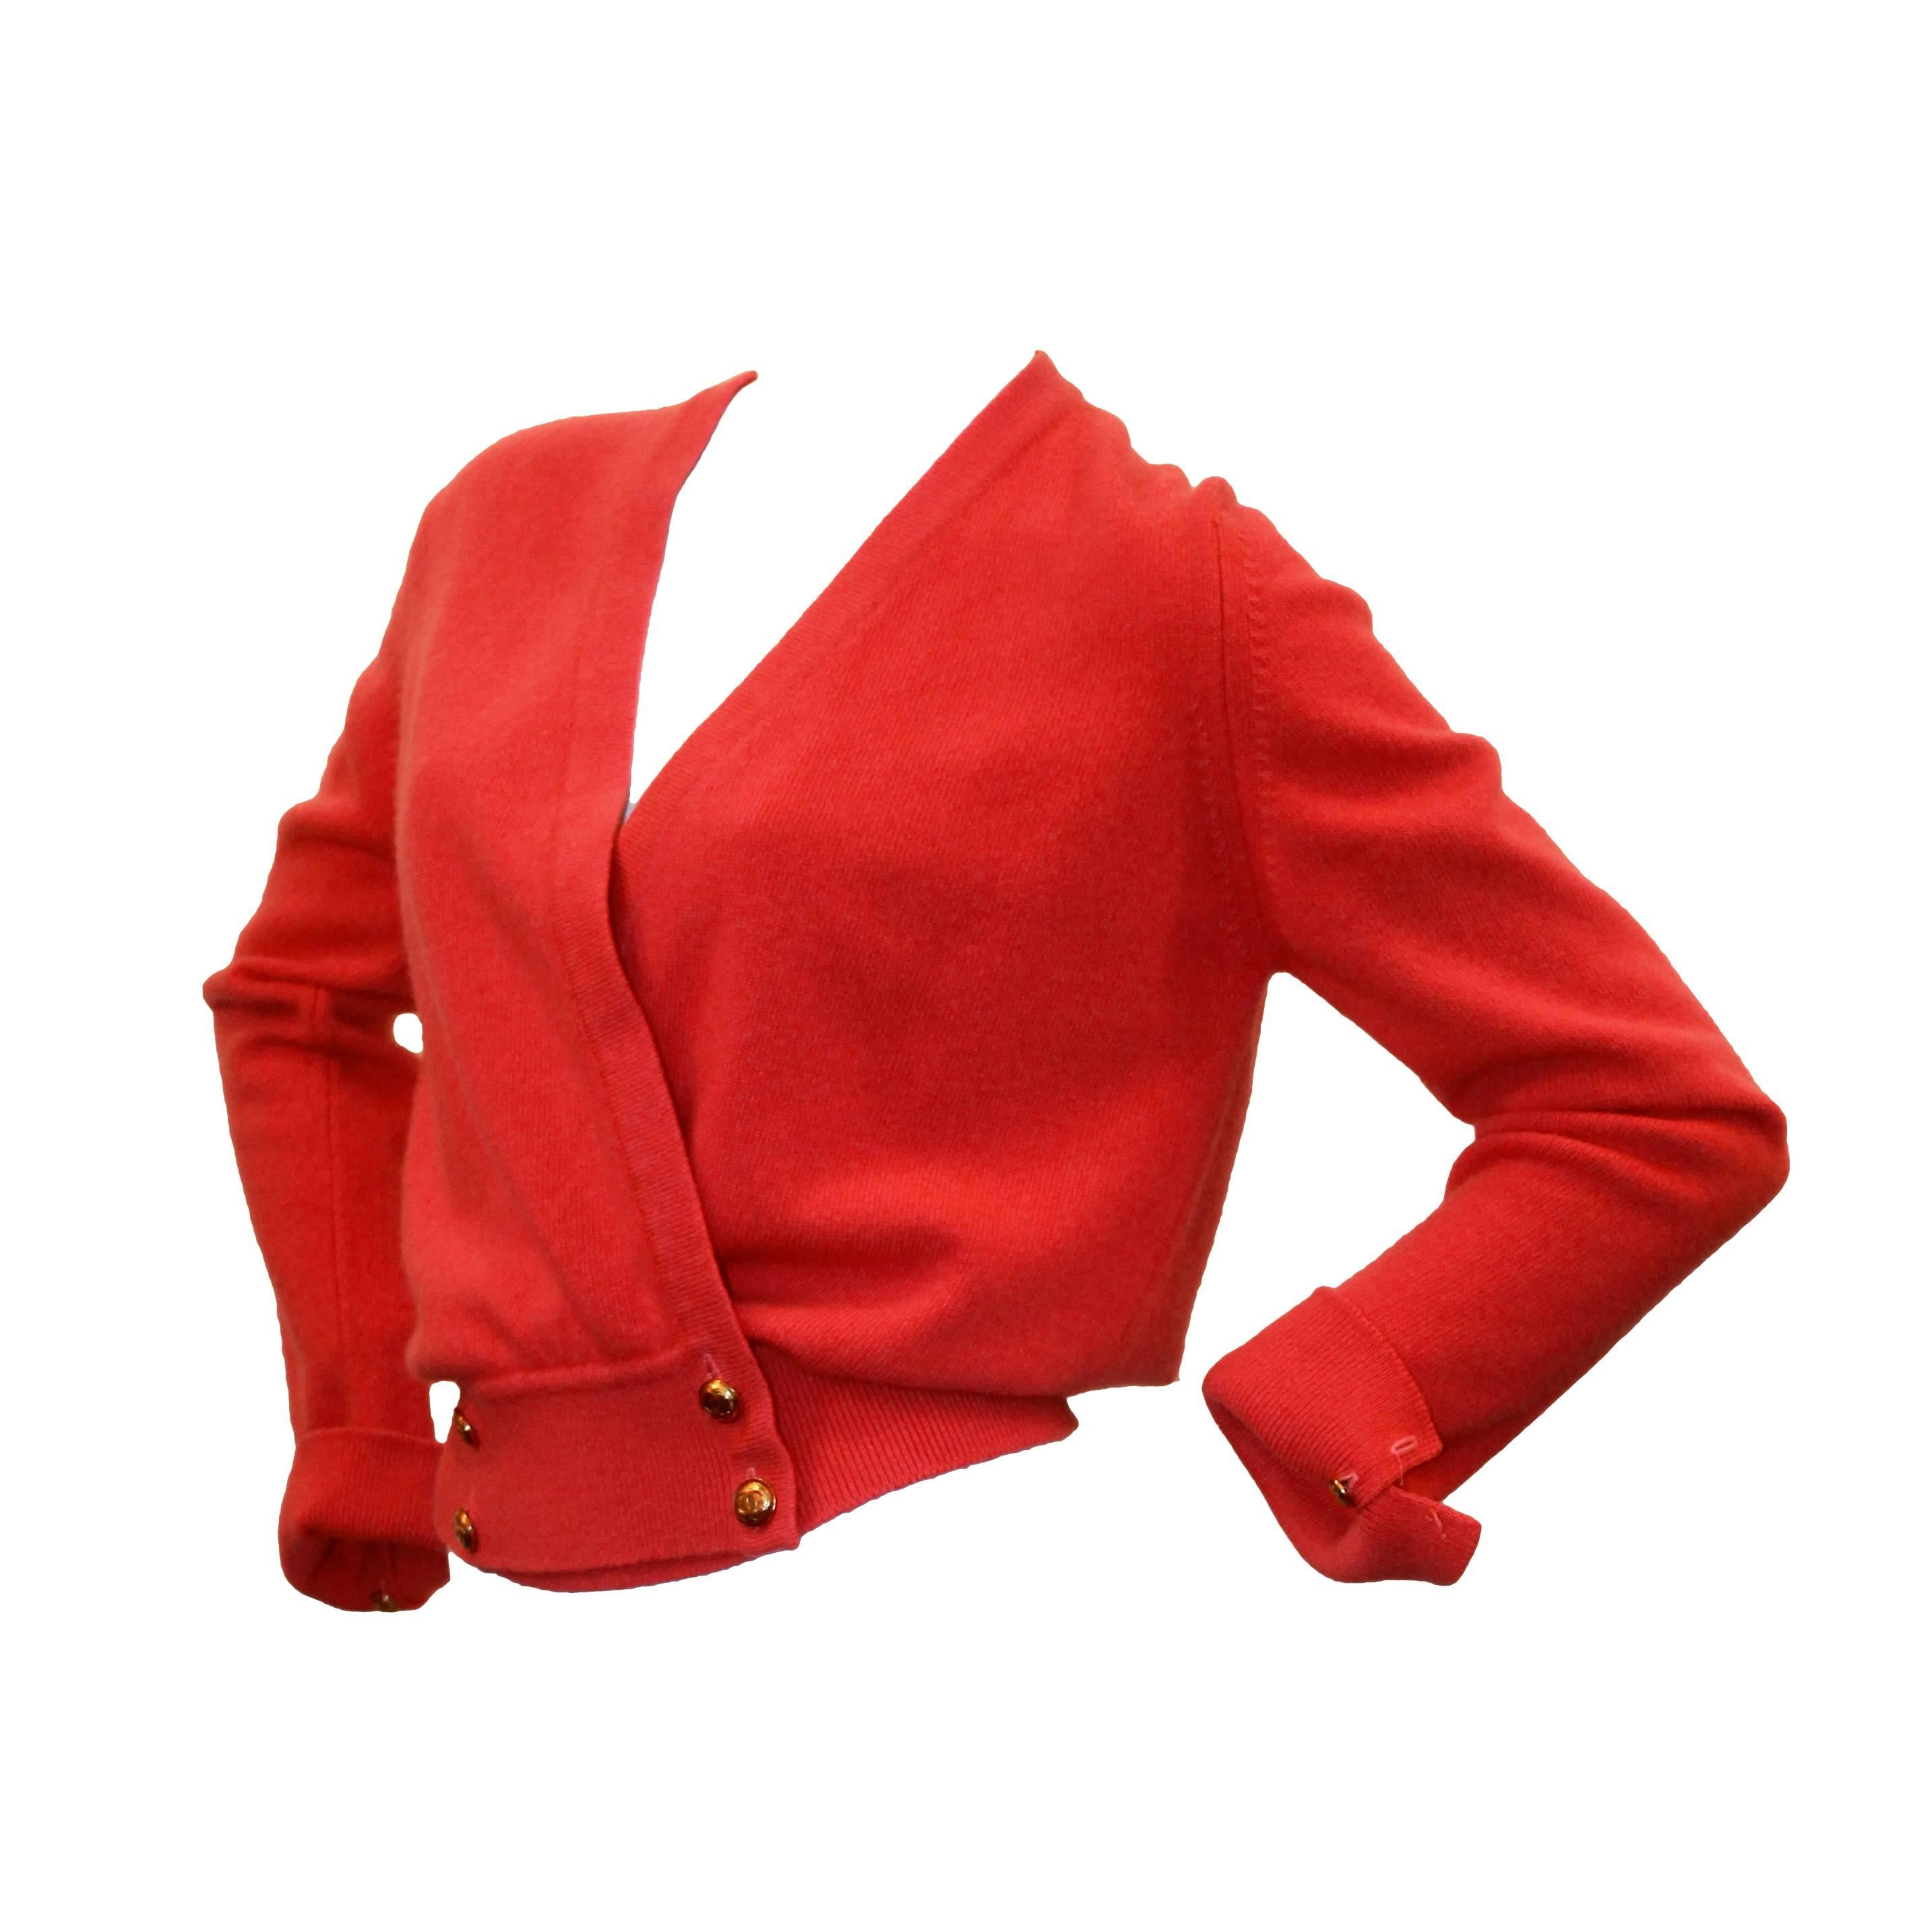 Chanel Vintage Coral Cashmere Cardigan with Cinched Bottom- circa 1980's - M